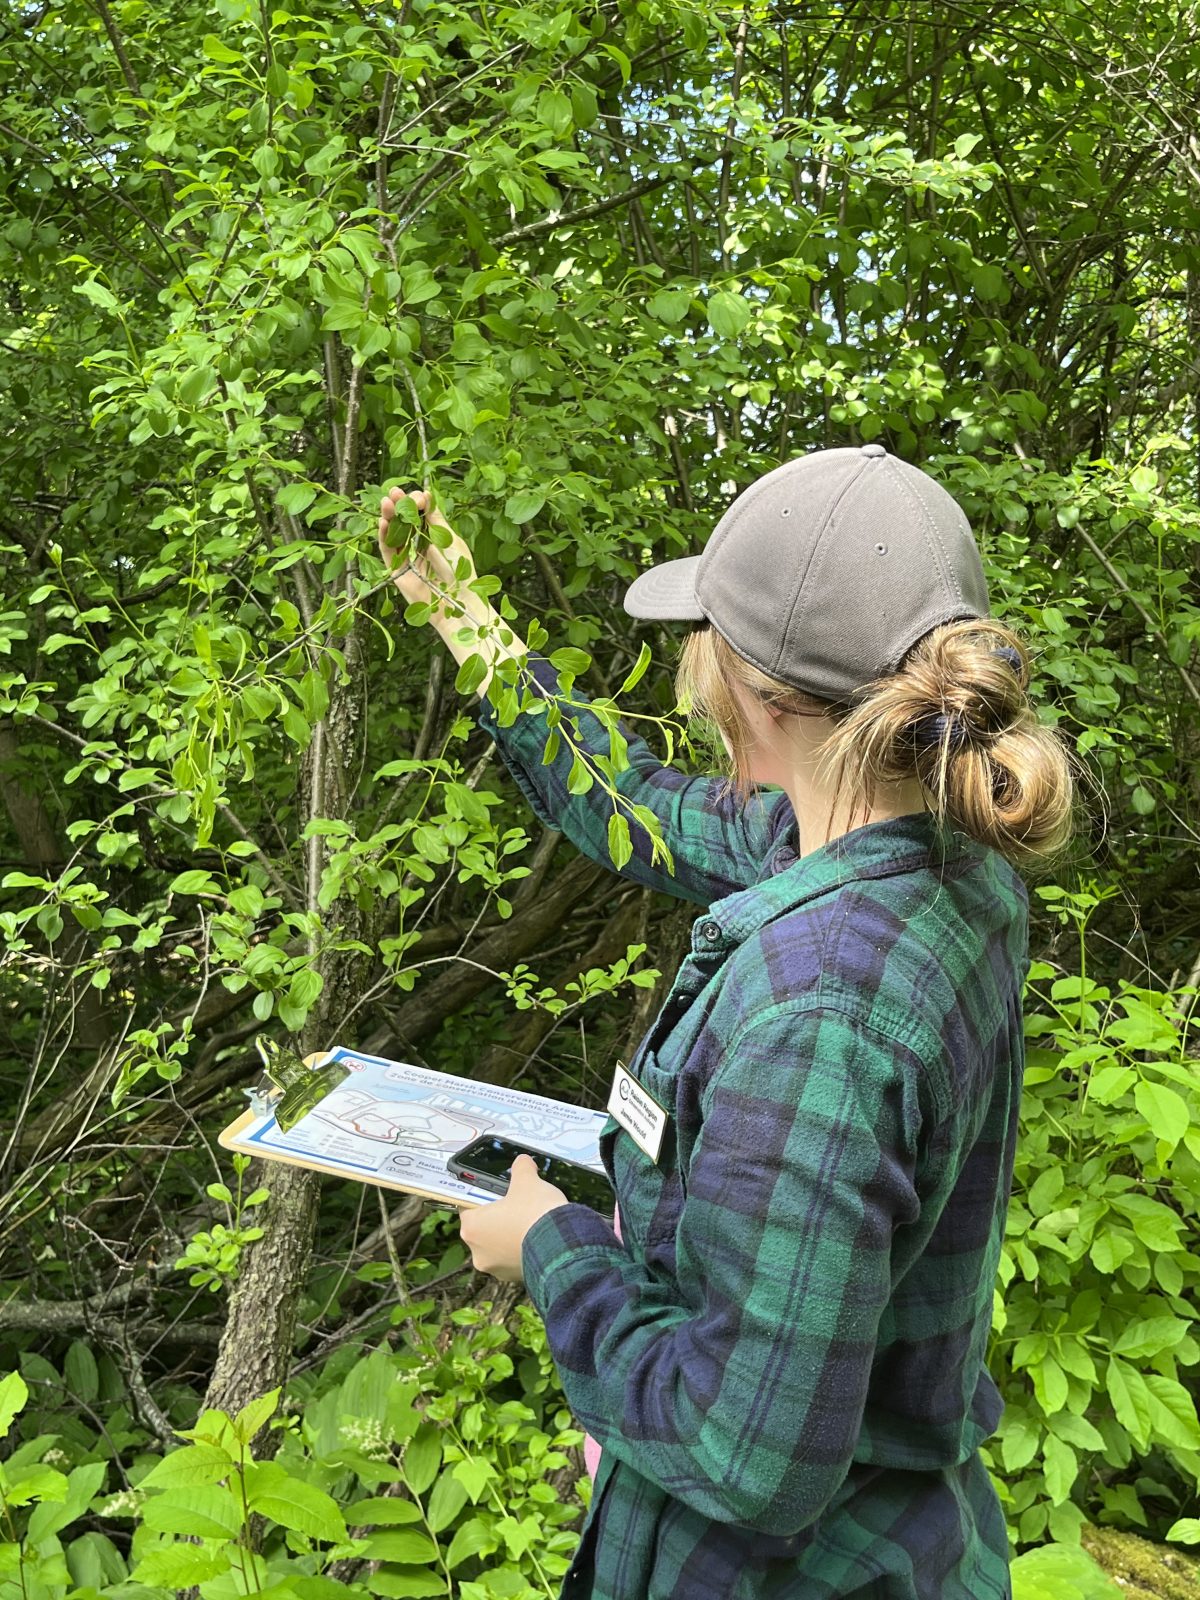 RRCA Tackles Invasive Shrubs at Cooper Marsh Conservation Area